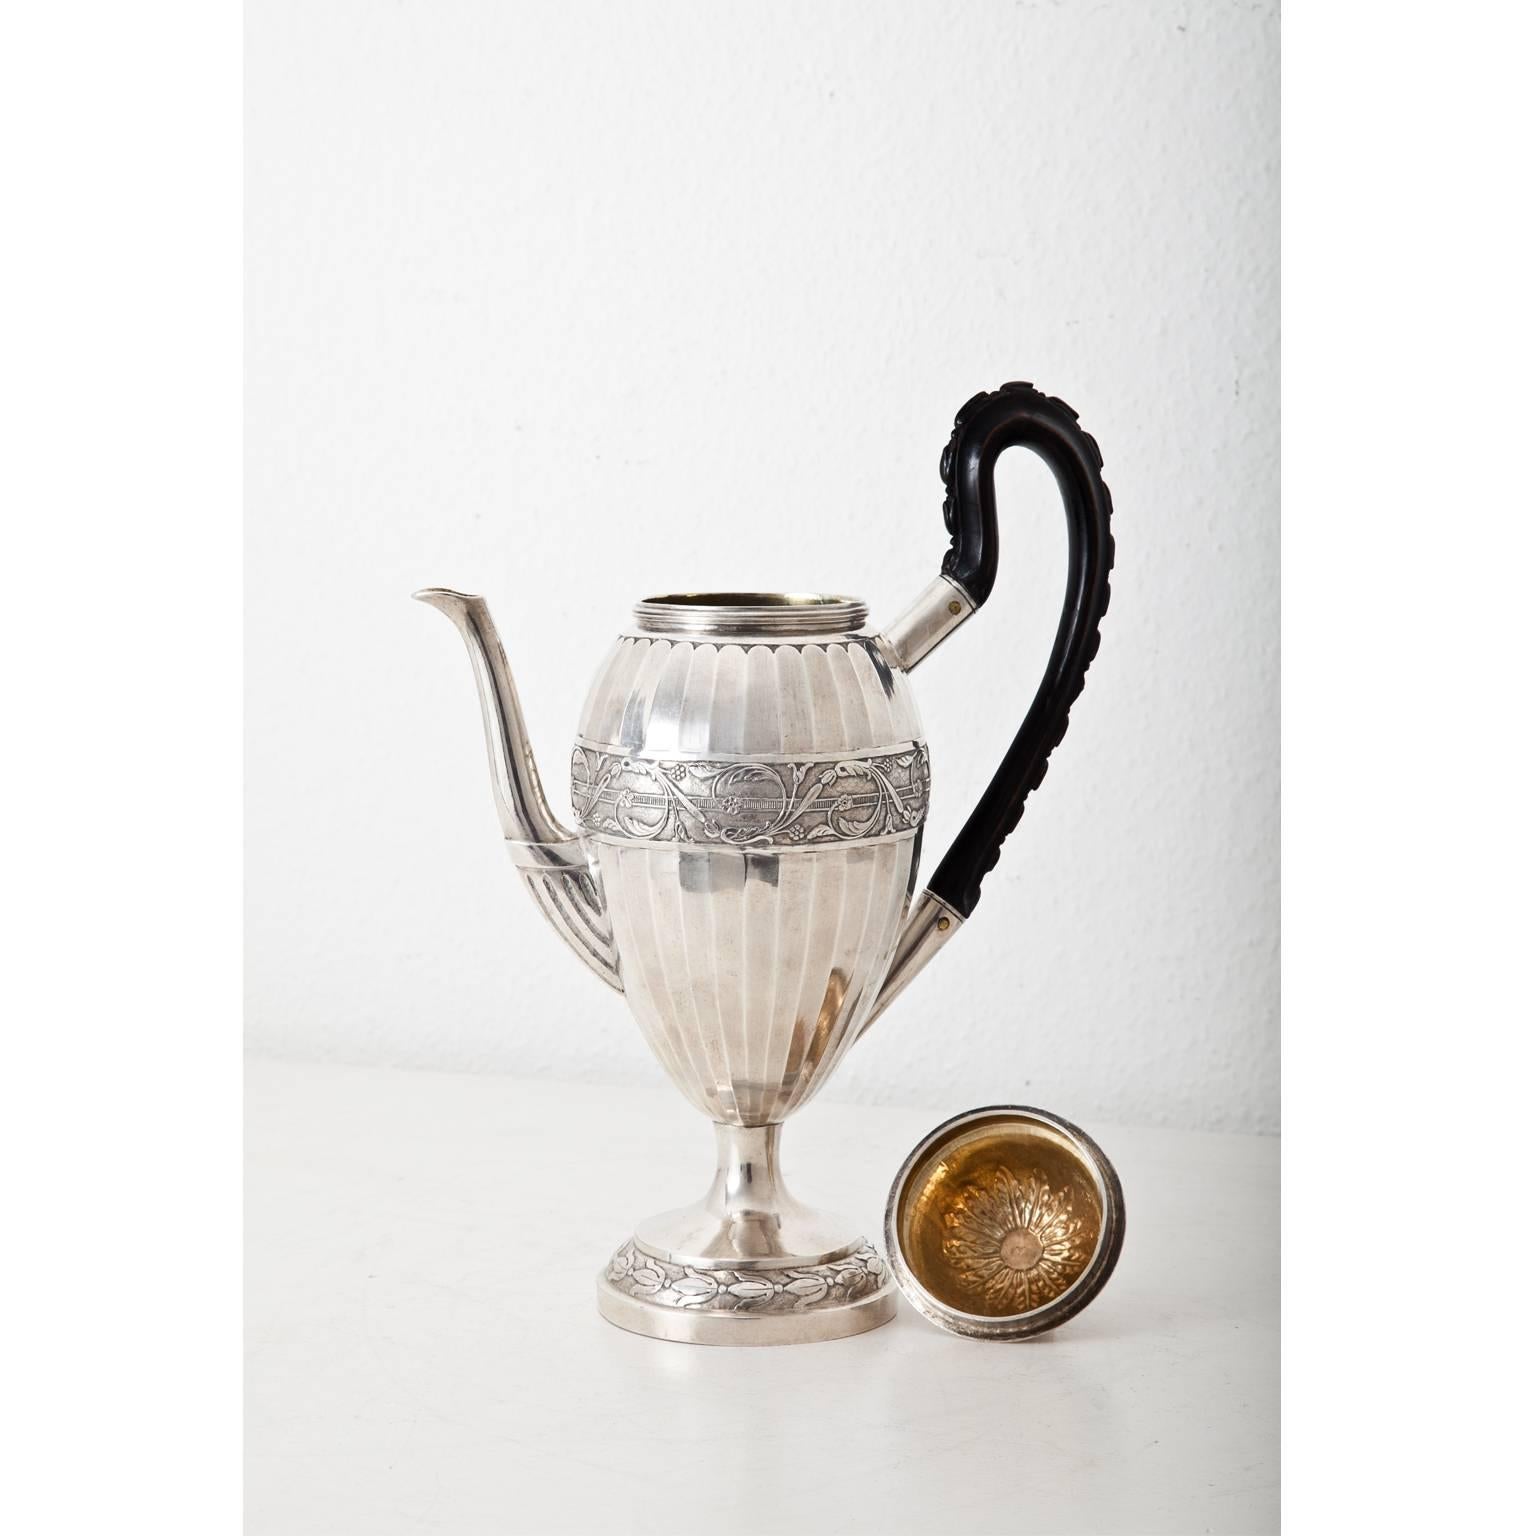 Early 19th Century Neoclassical Coffee Pot, Augsburg, 1807-1809